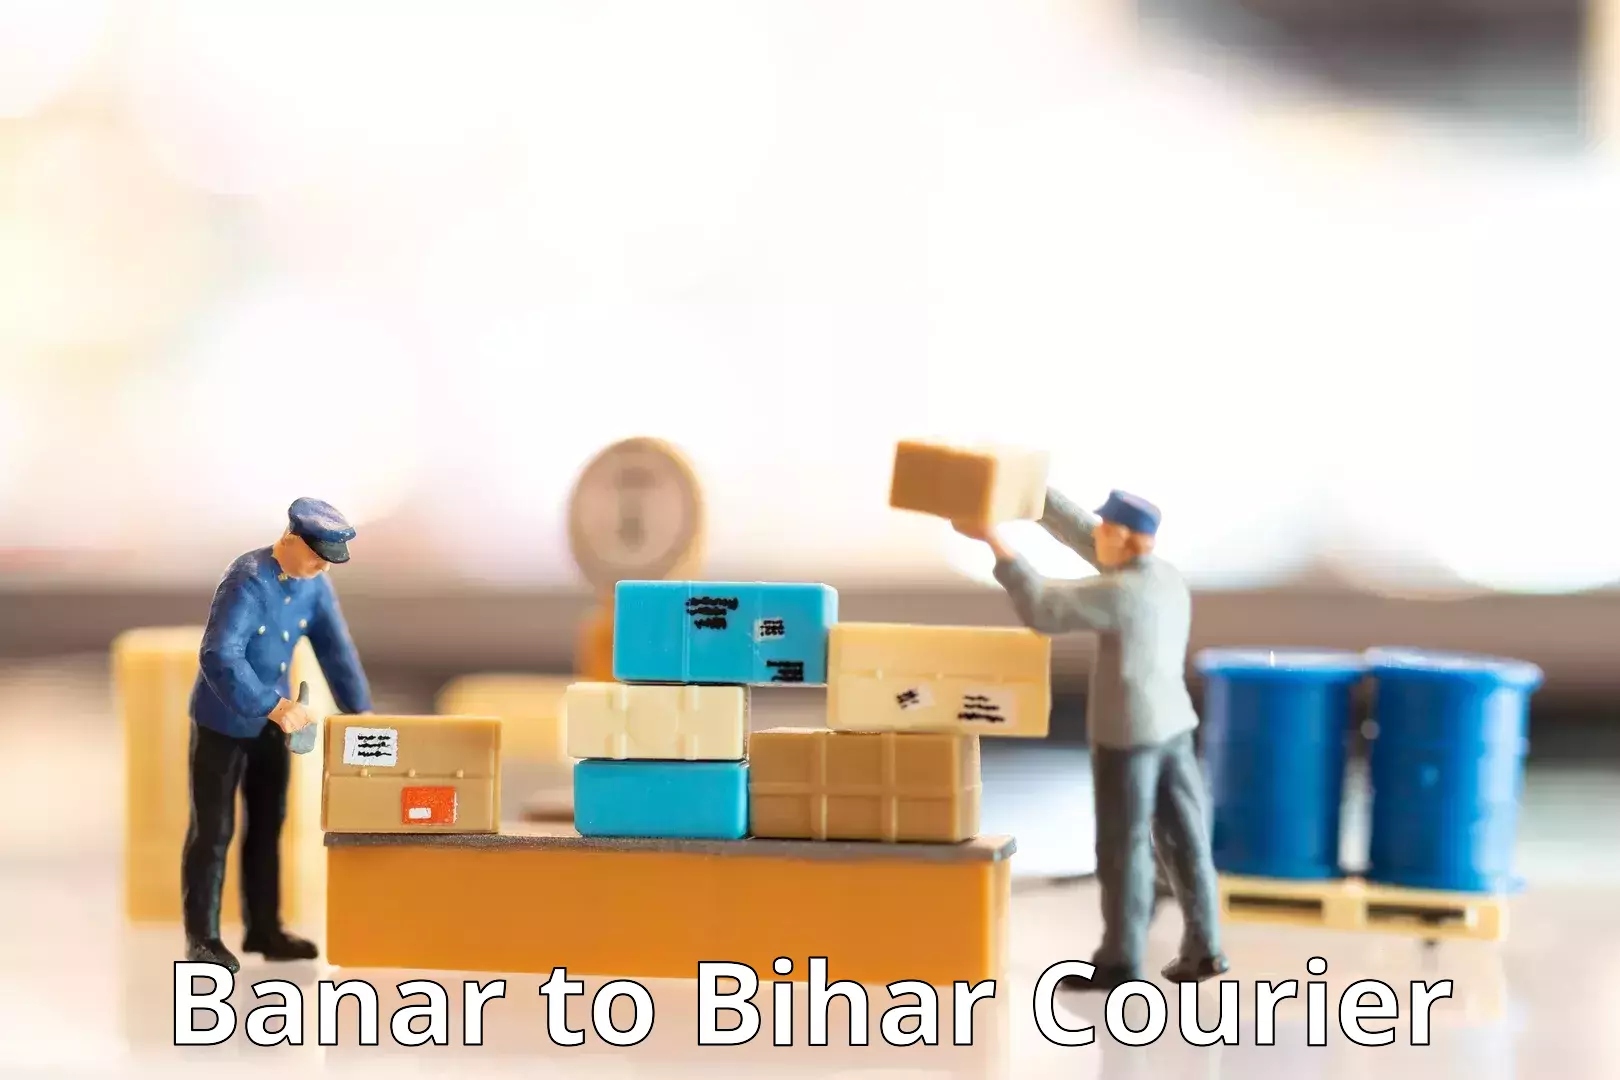 State-of-the-art courier technology Banar to Barhiya